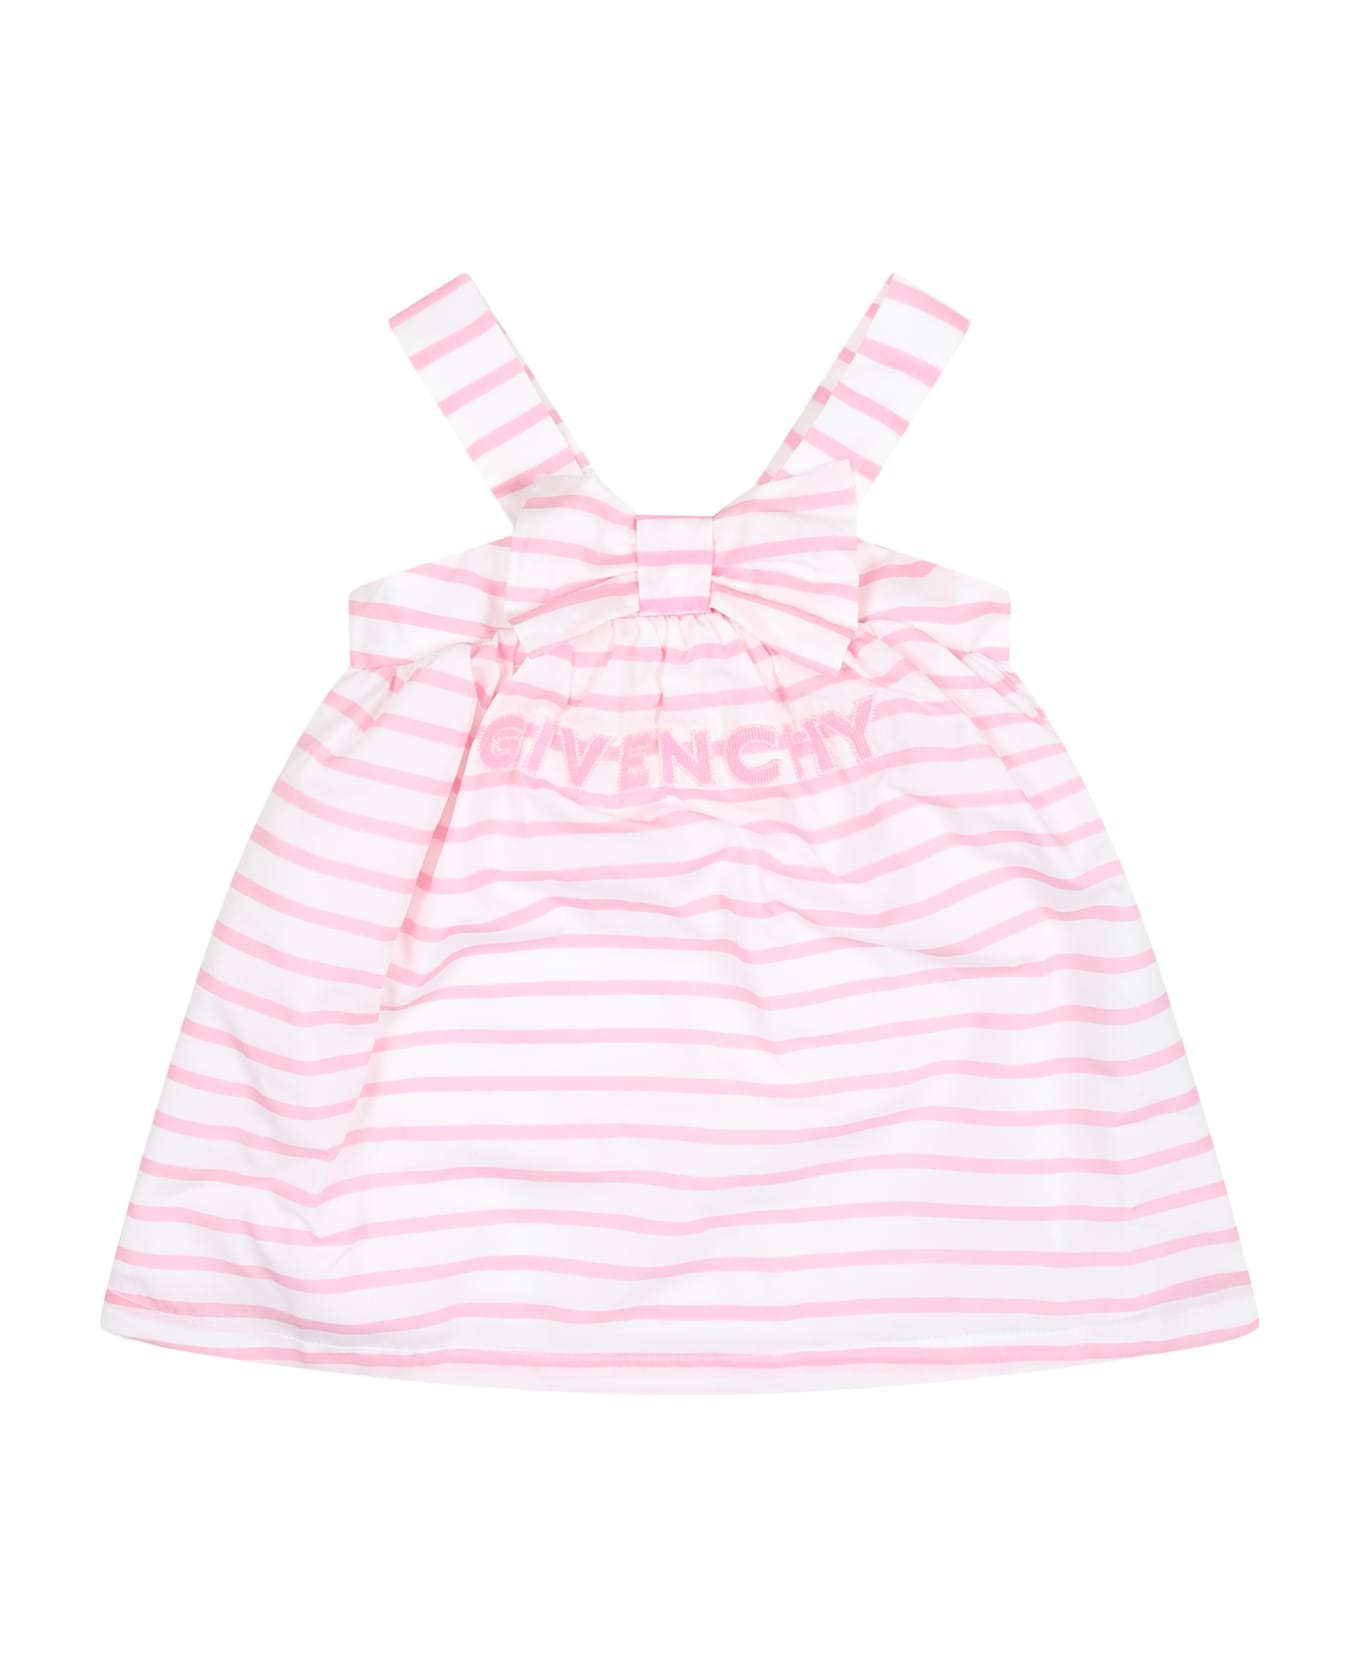 Givenchy Pink Dress For Baby Girl With Stripes - Rosa